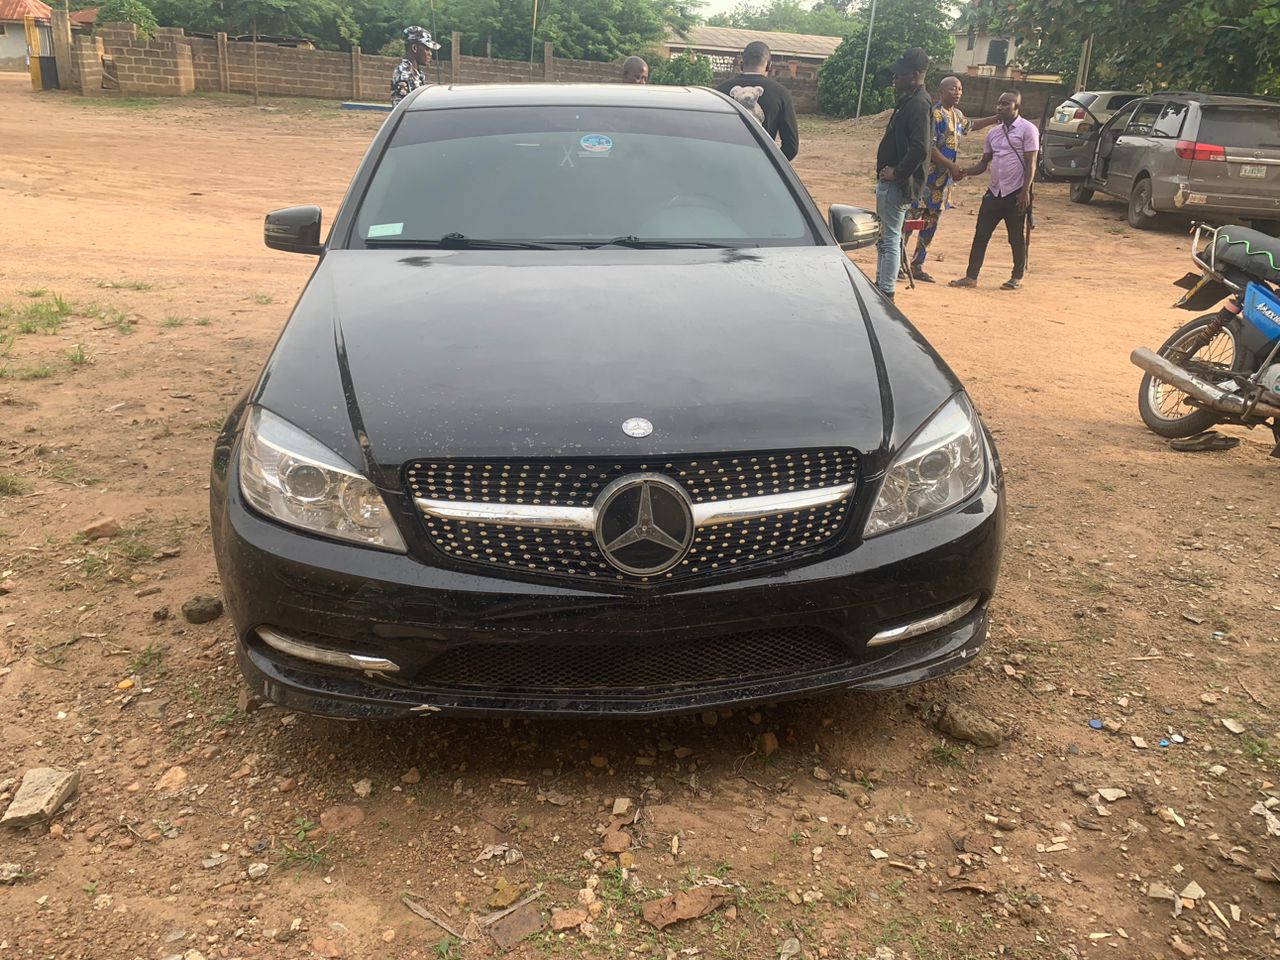 Police in Osun arrest suspected car snatchers, receiver; recover stolen vehicle, arms